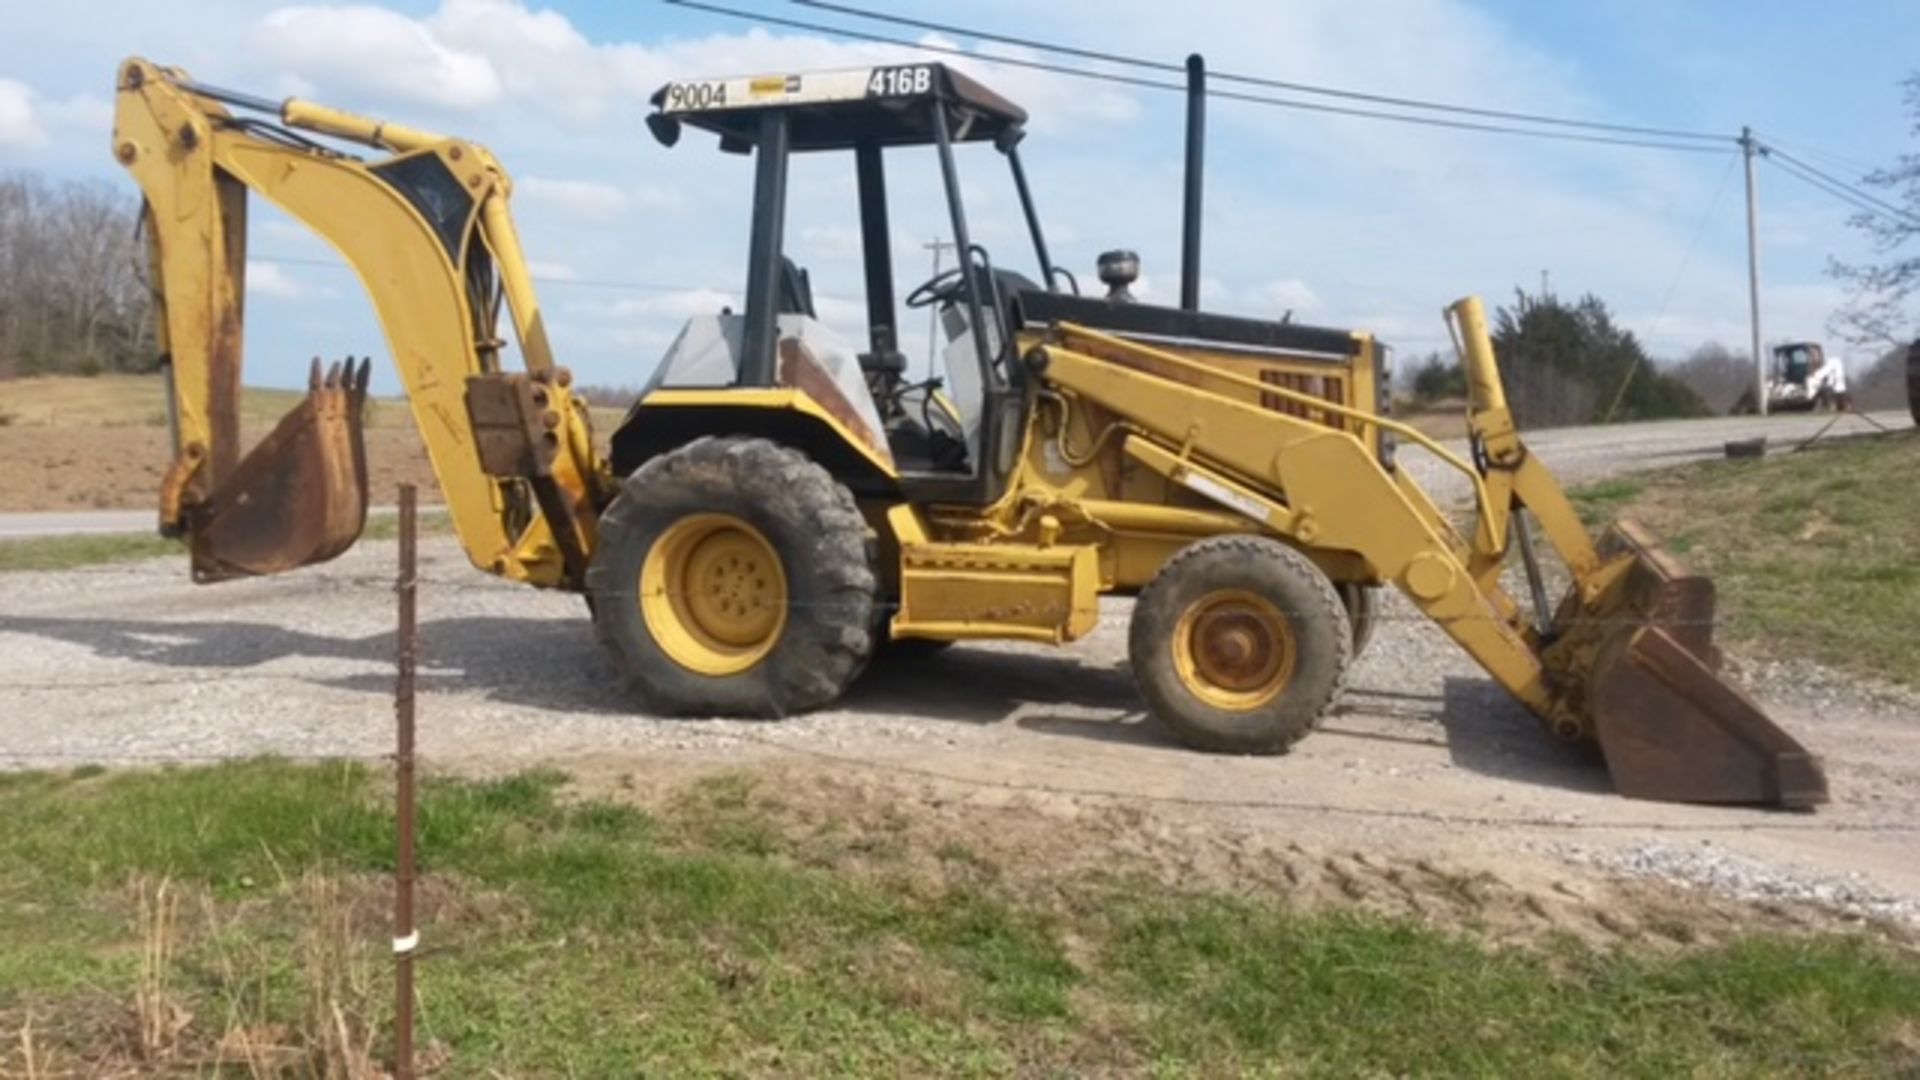 CAT 416B Loader/Backhoe, OROPS, 2WD, New Side covers and Exhaust S/N 85G09004 (Located at 3823 - Image 3 of 3